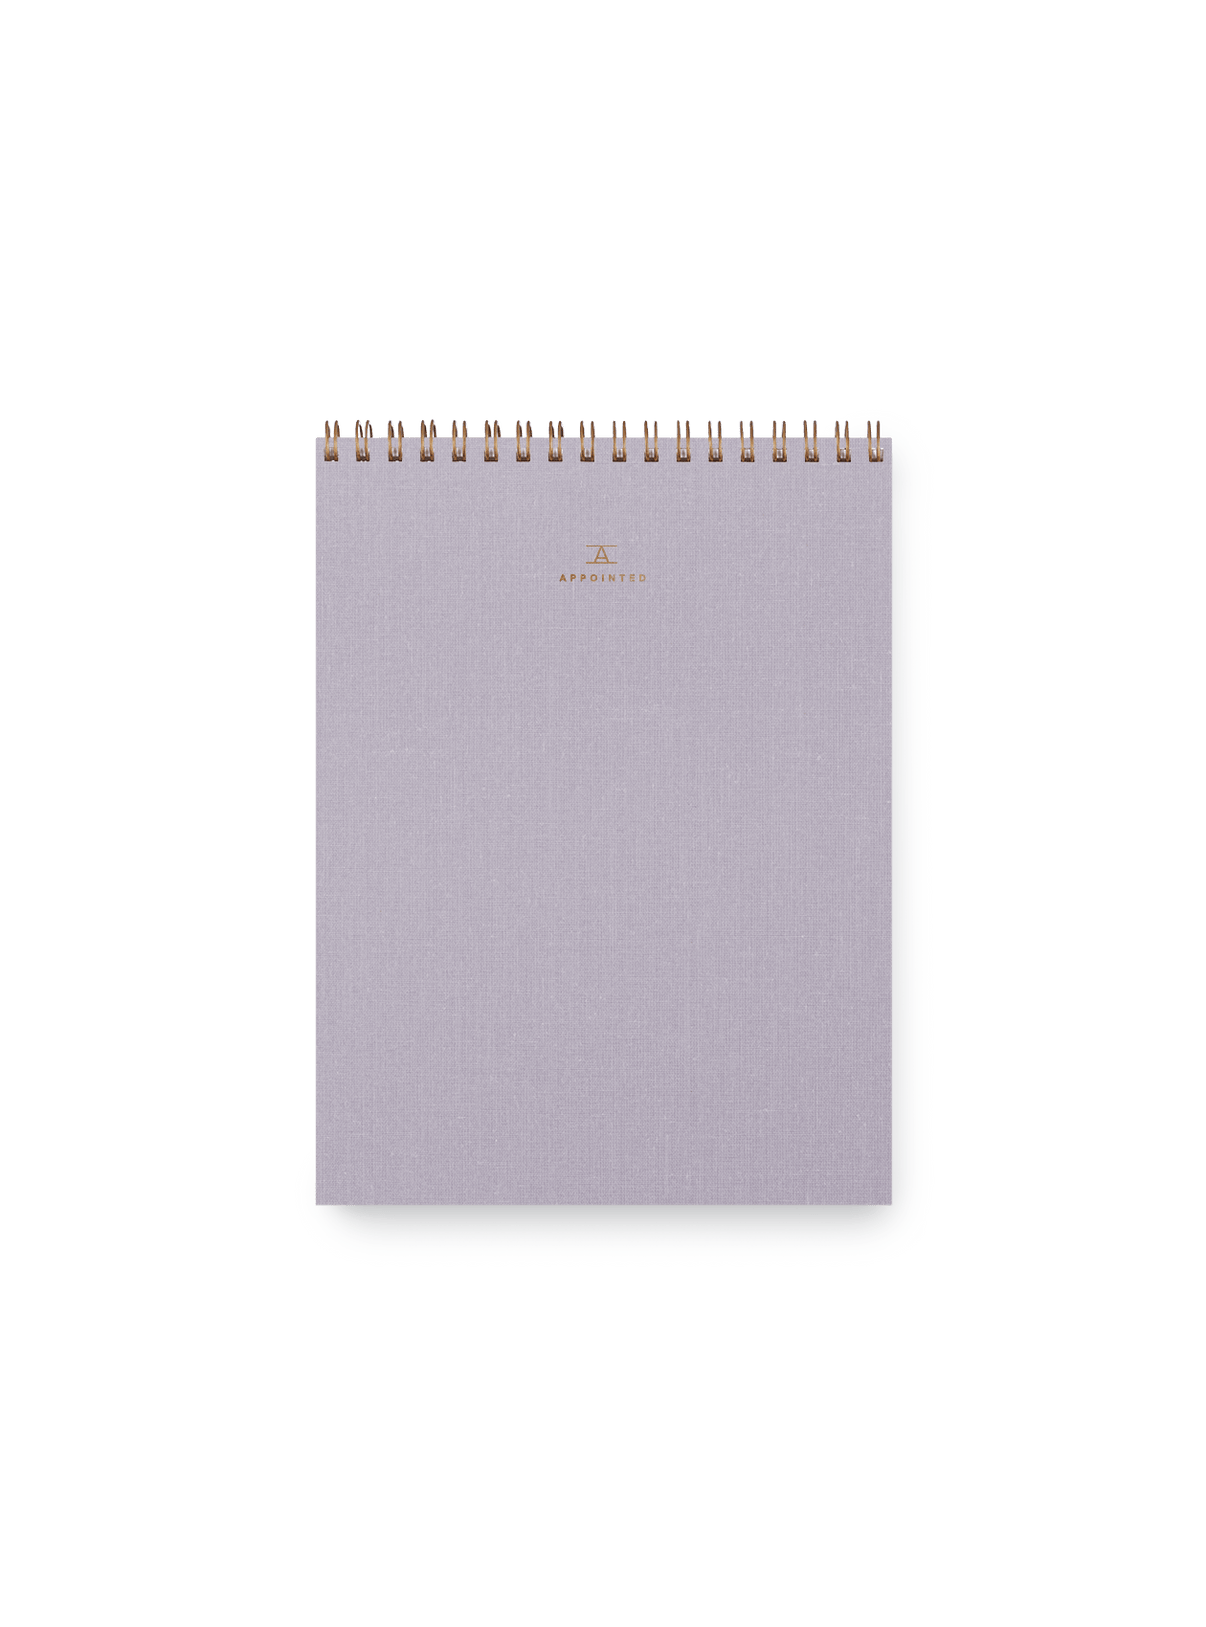 Appointed Office Notepad with gold foil details, bookcloth cover, and brass wire-o binding || Lavender Gray